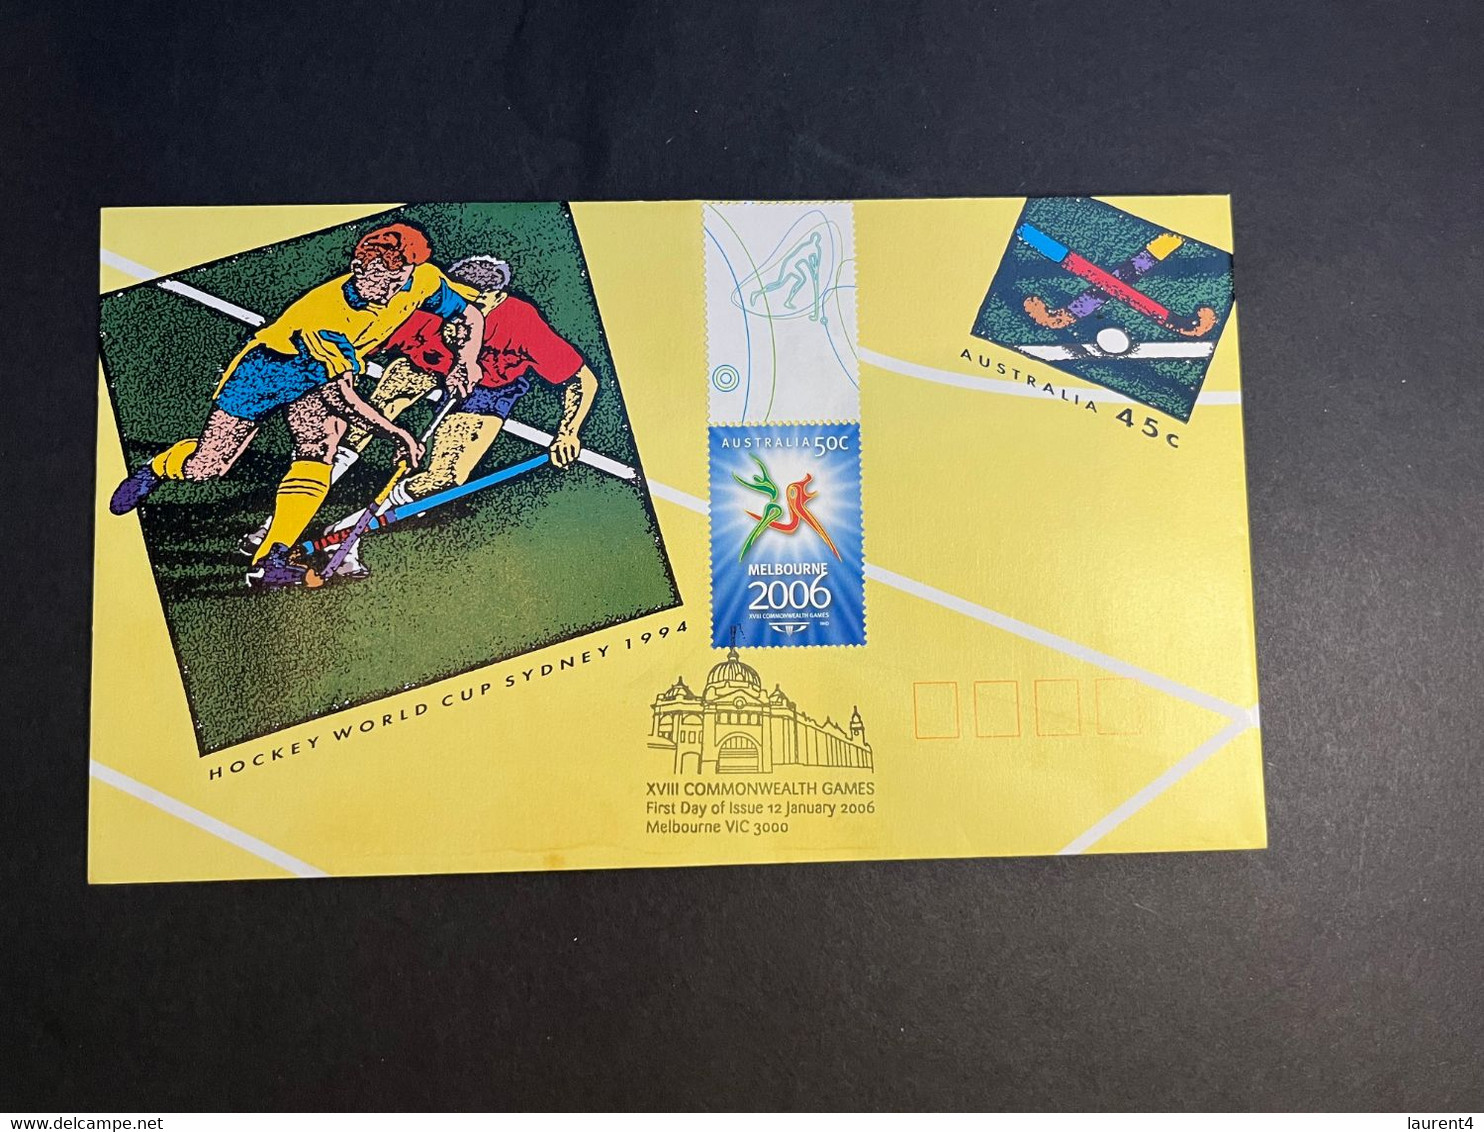 (3 N 35 A) Australia - Hockey World Cup 1994 (with Additional Stamp) Pre-Stamp Envelope - Hockey (Veld)